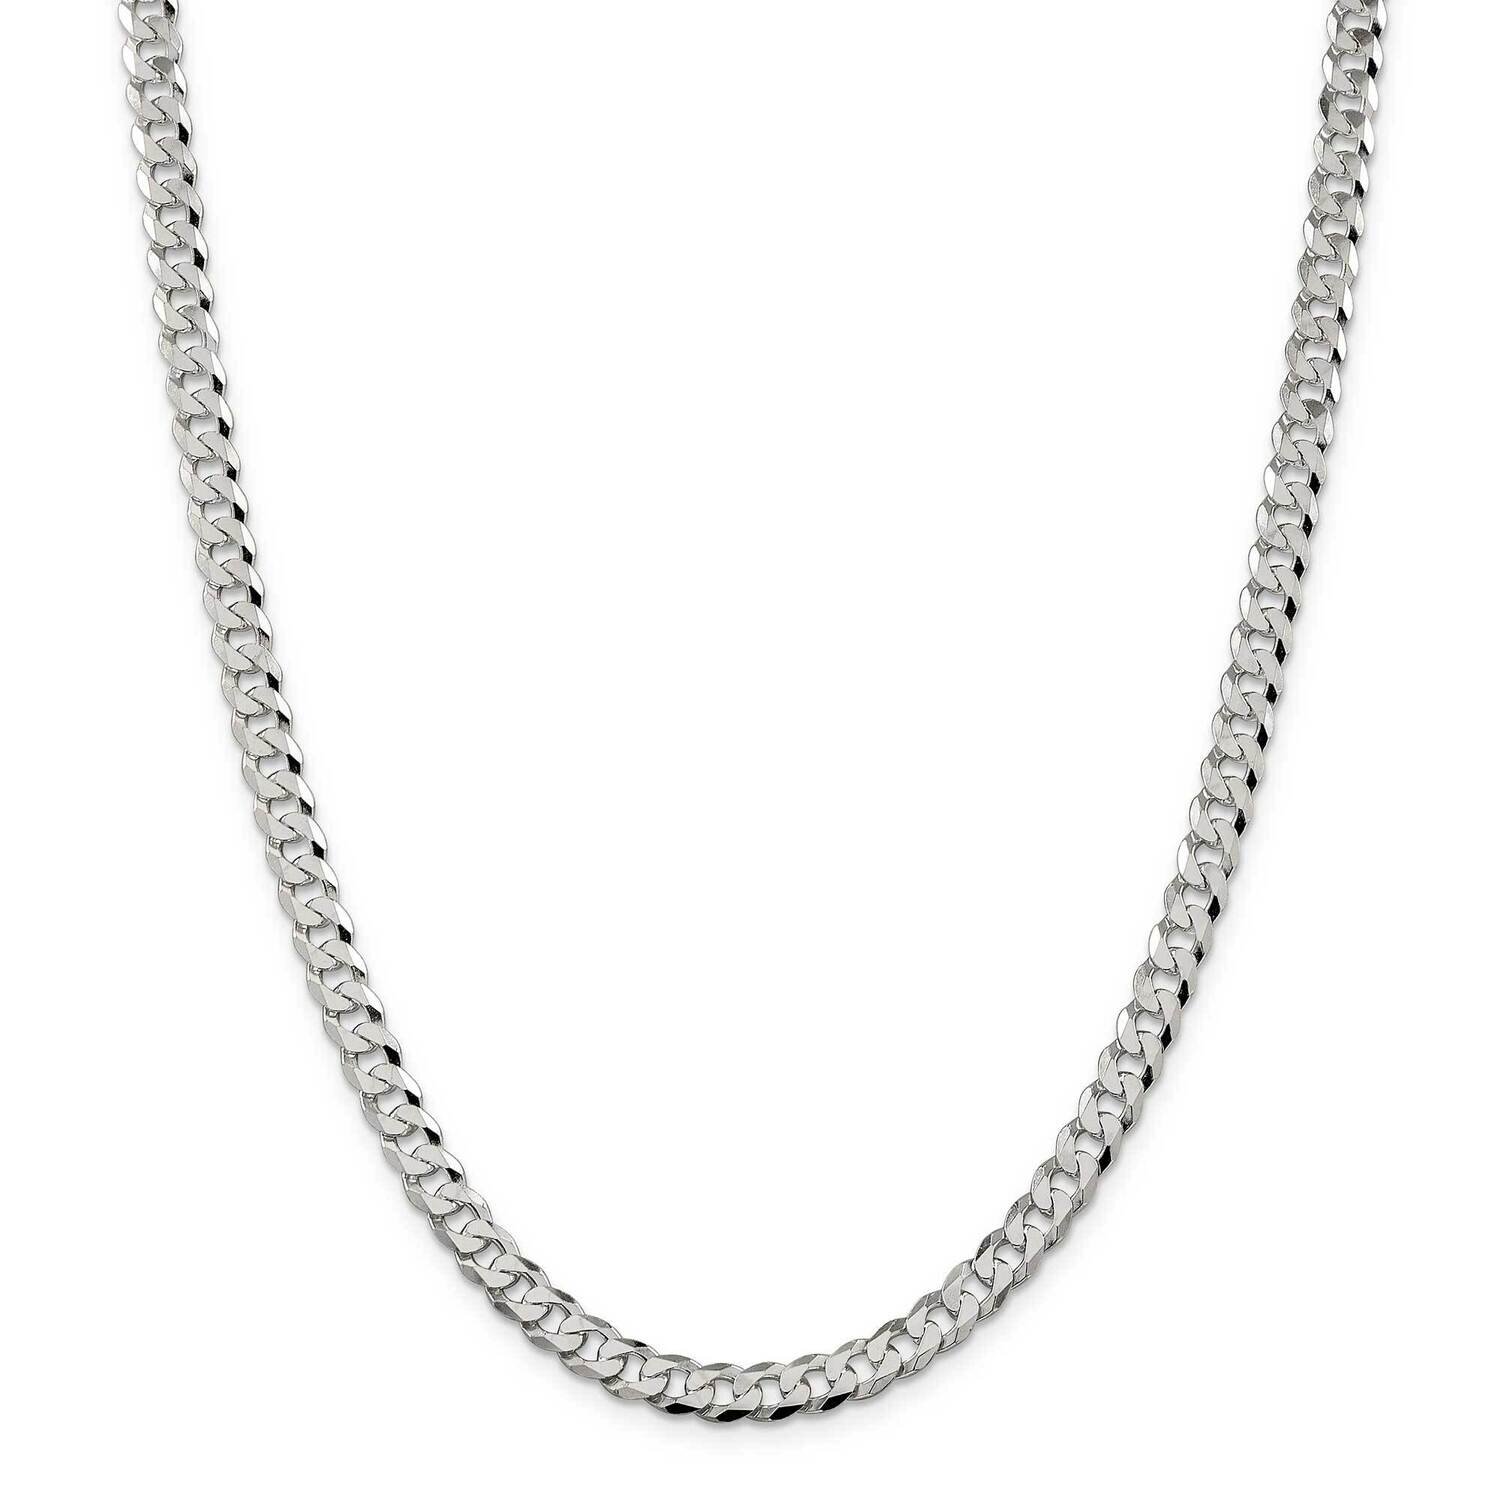 6mm Beveled Curb Chain 30 Inch Sterling Silver QFB150-30